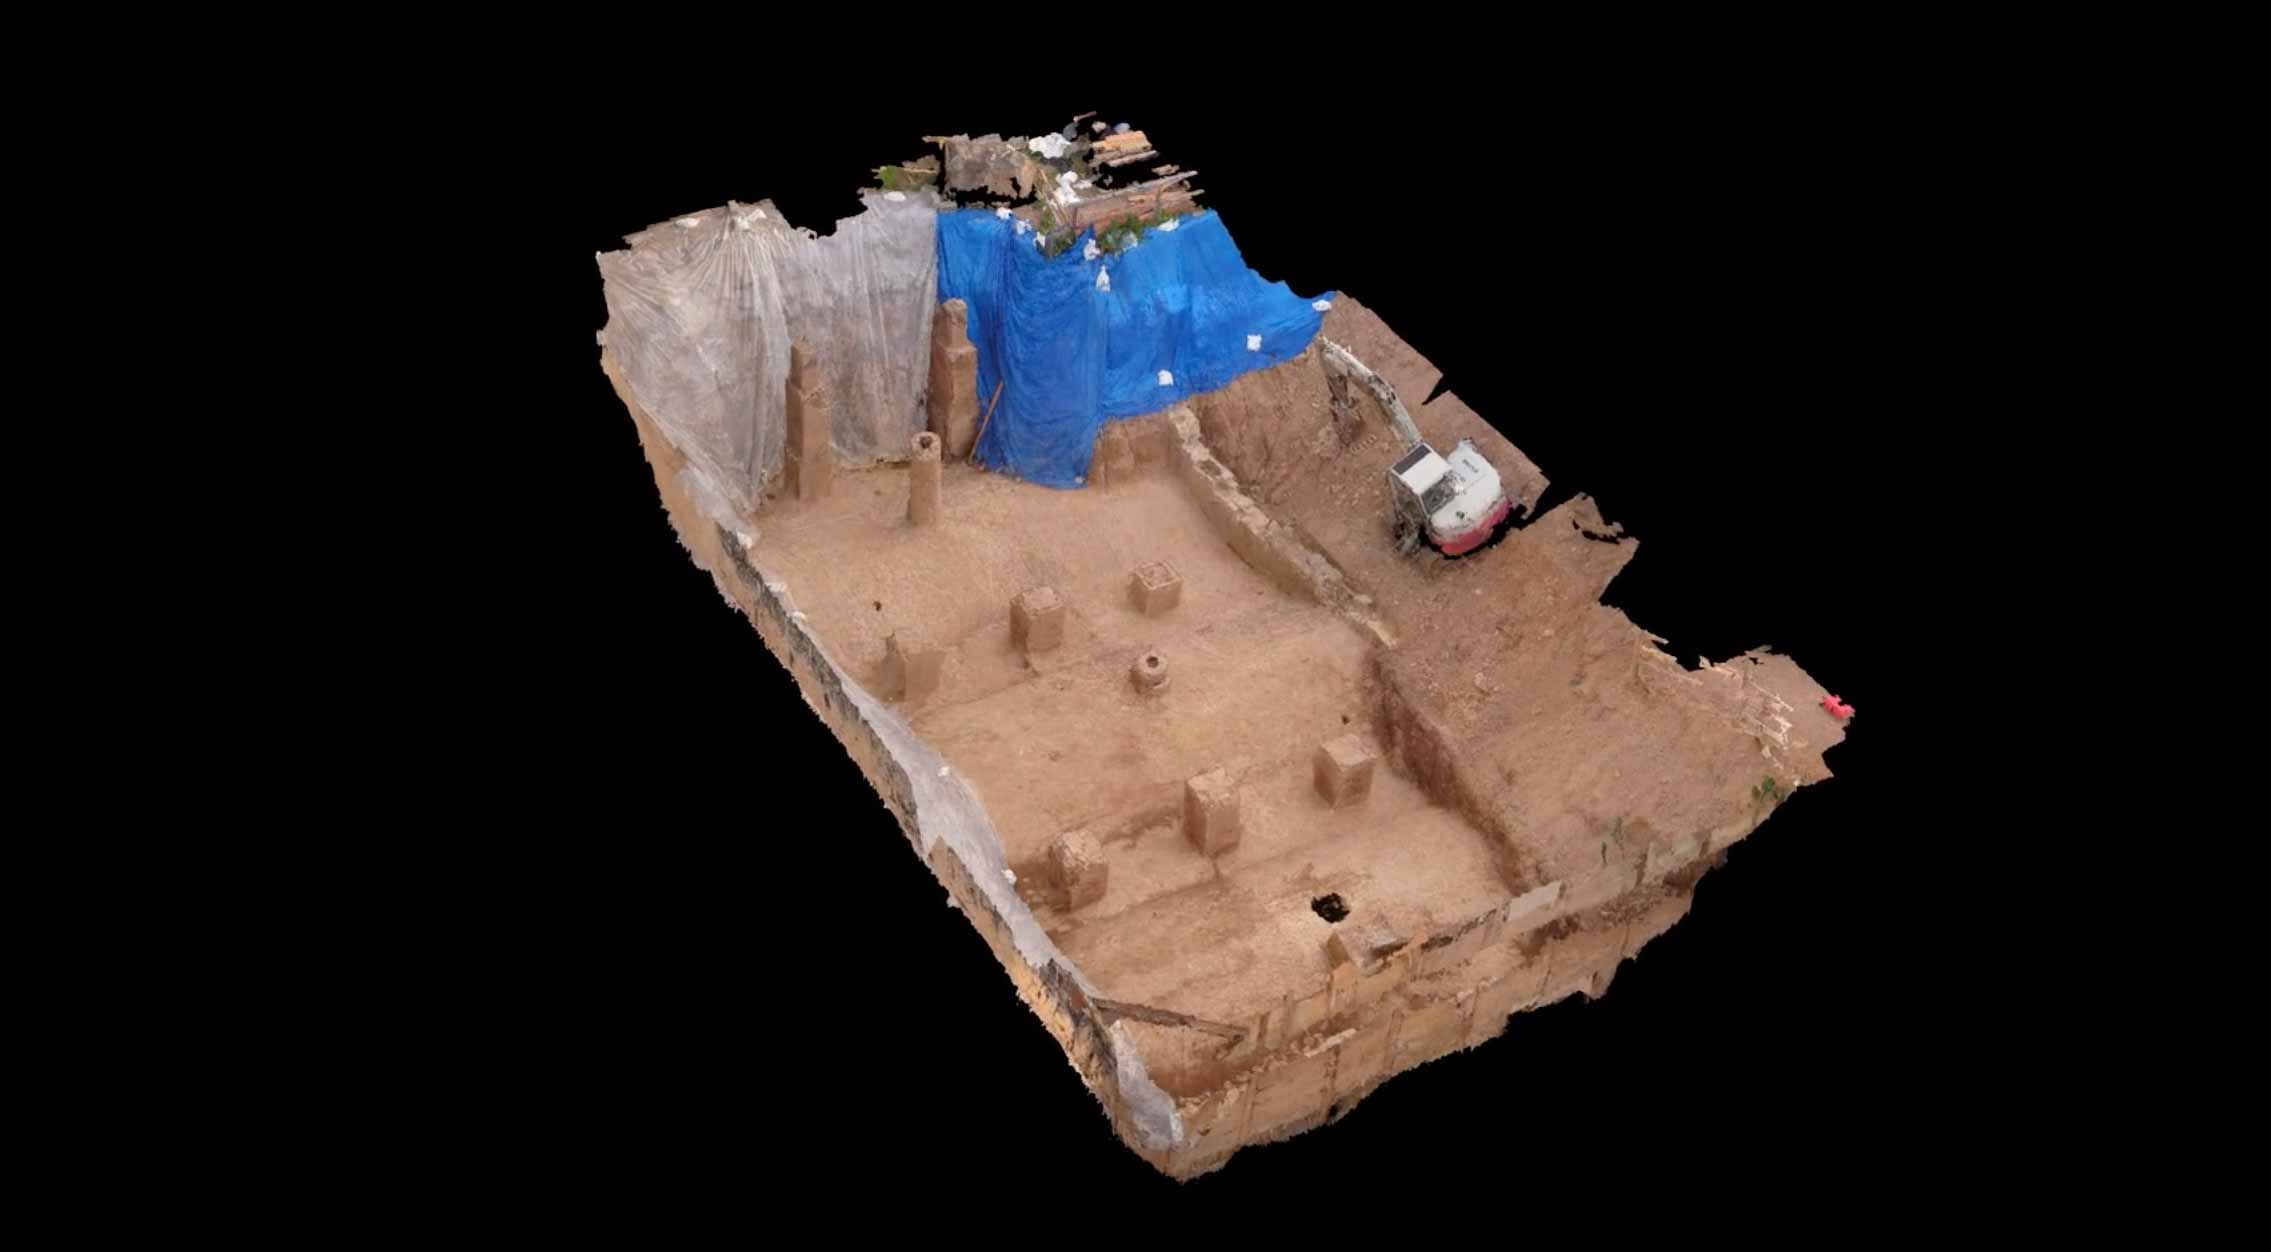 Archaeologist uses Drones to Create a 3D Model of 1860s Brewery Vaults in Brooklyn, NY